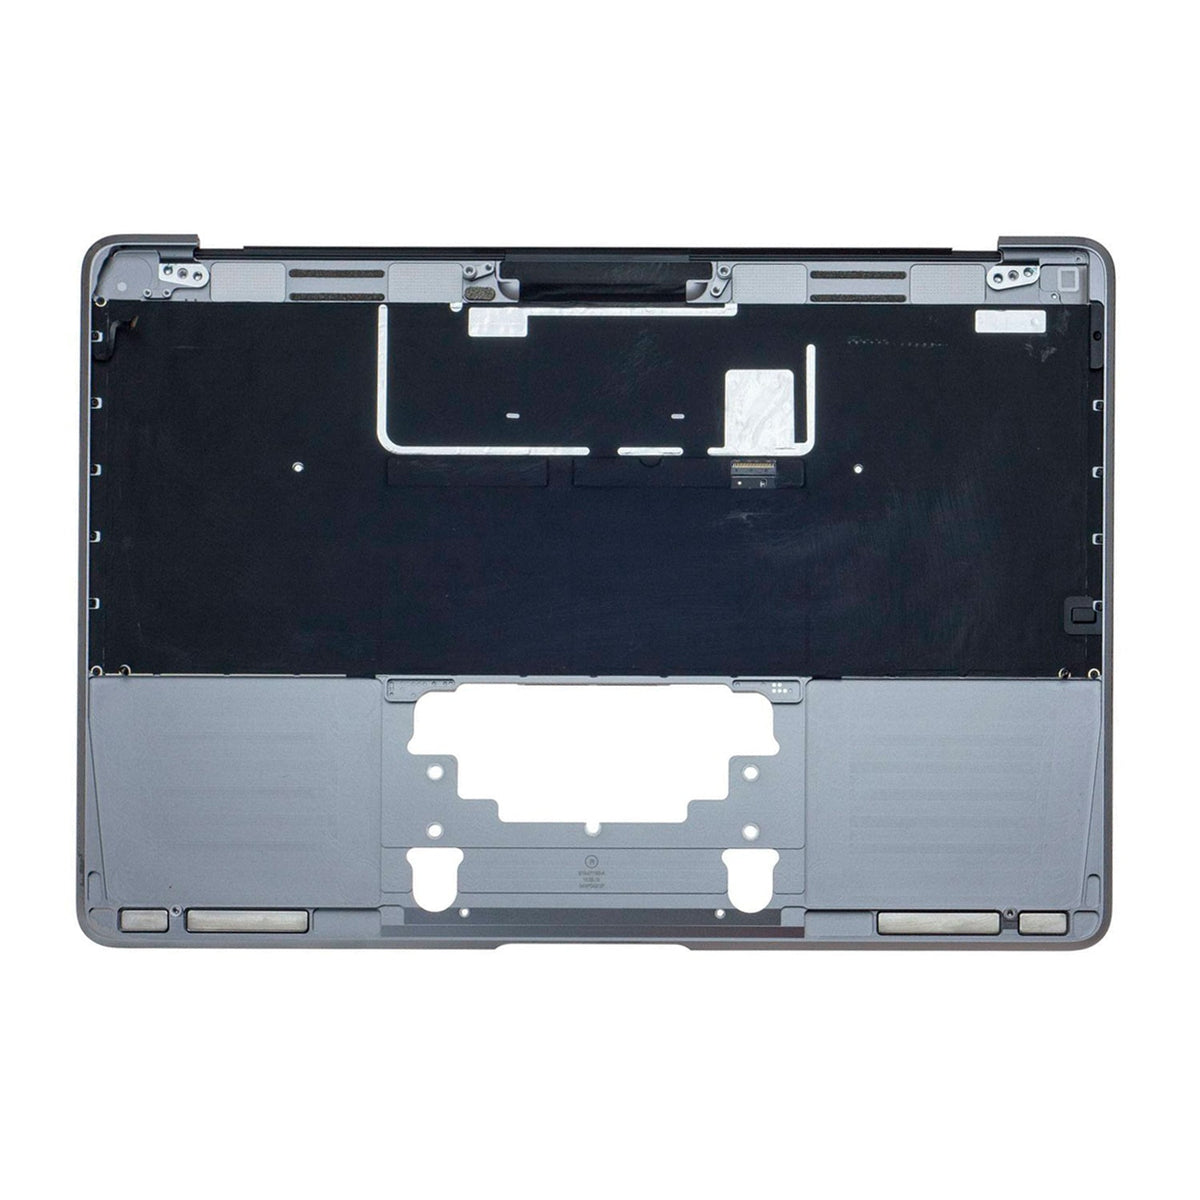 SPACE GRAY UPPER CASE WITH KEYBOARD FOR MACBOOK RETINA 12" A1534 (EARLY 2016 - MID 2017)